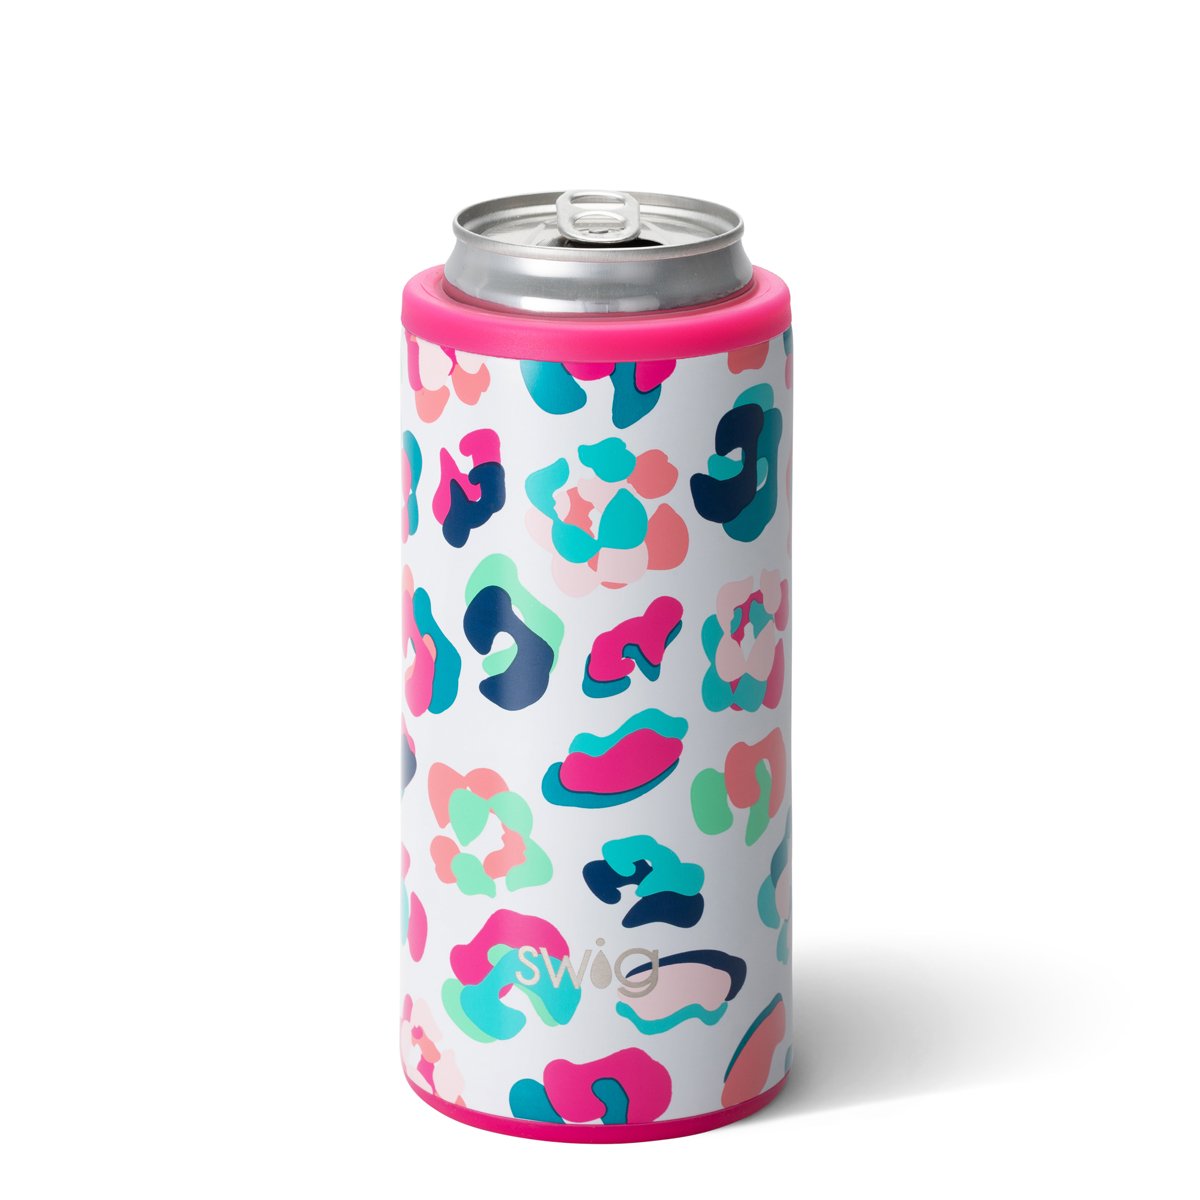  Swig Slim Can Cooler, Insulated Skinny Can Holder